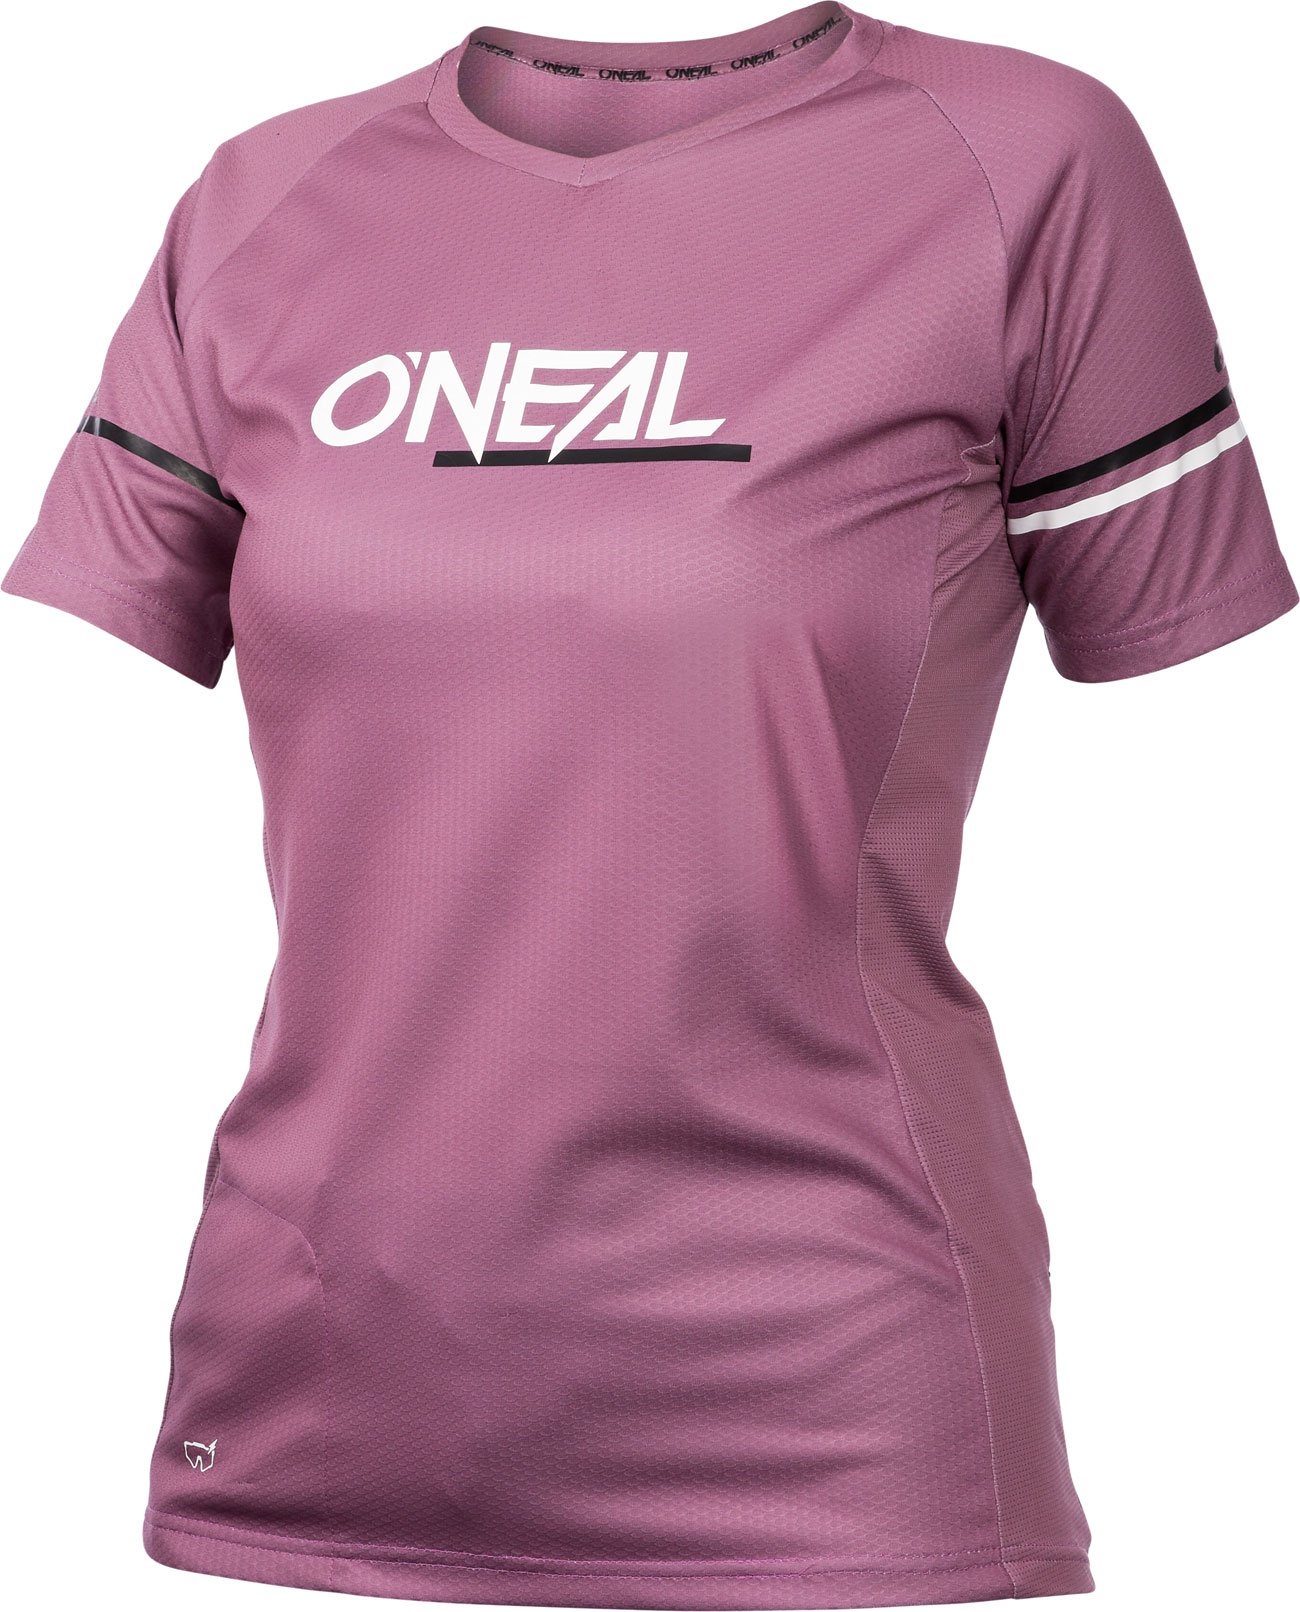 ONeal Soul S23, maillot femme - Fuchsia - S